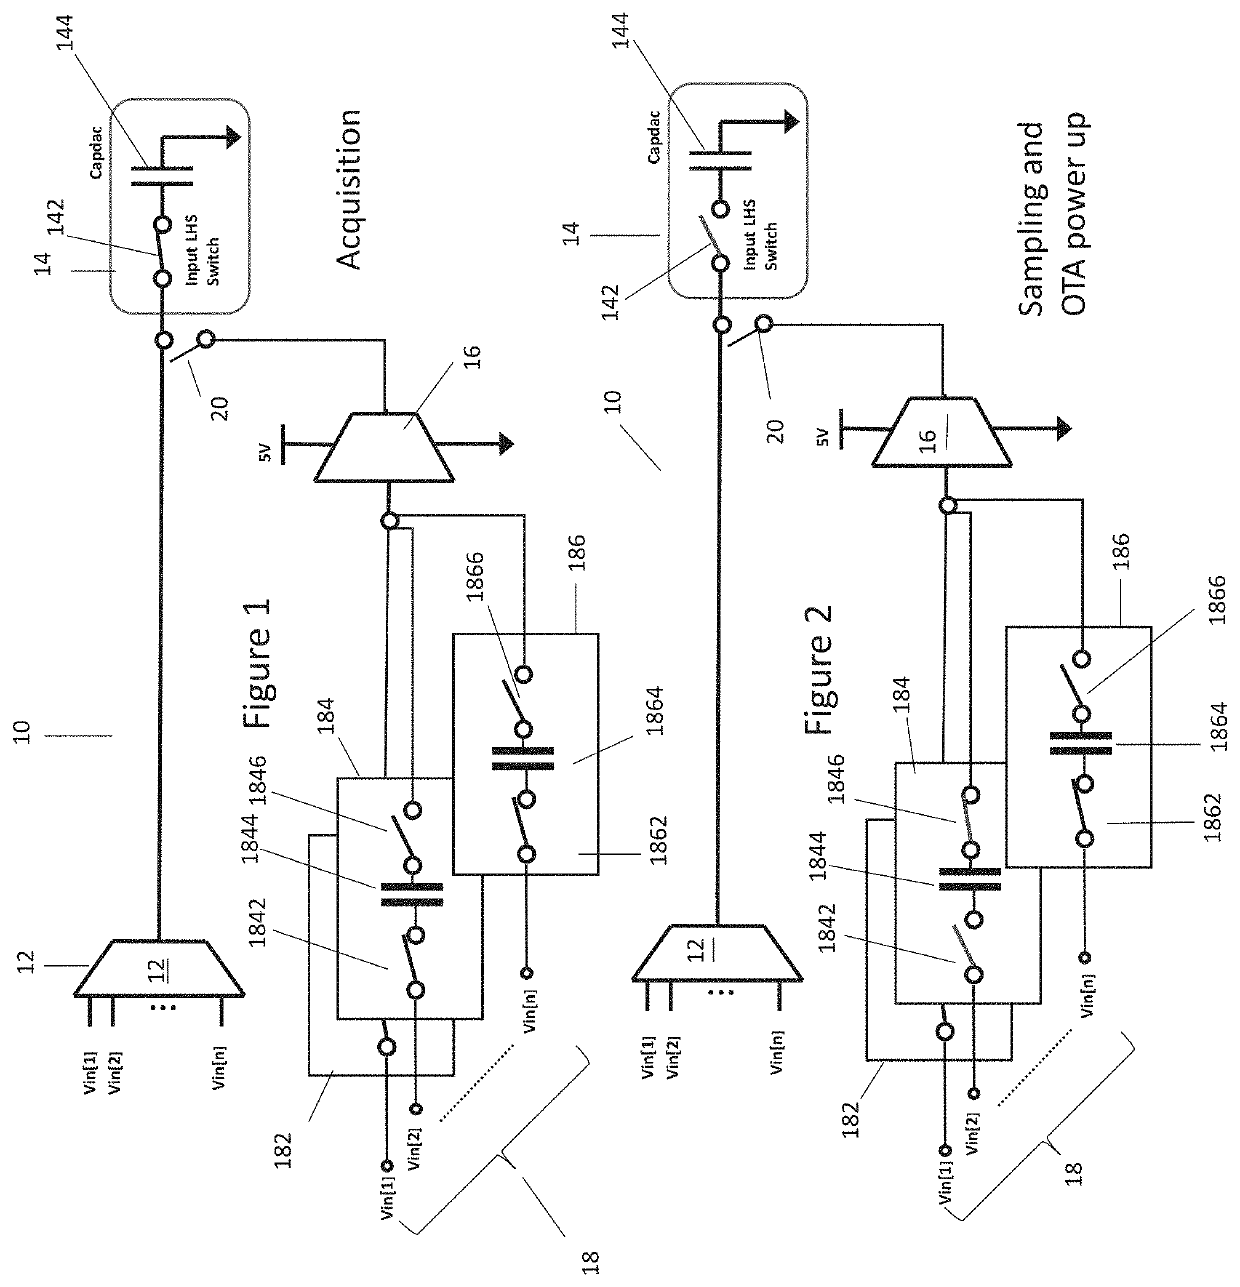 Pre-charging circuitry for multiplexer